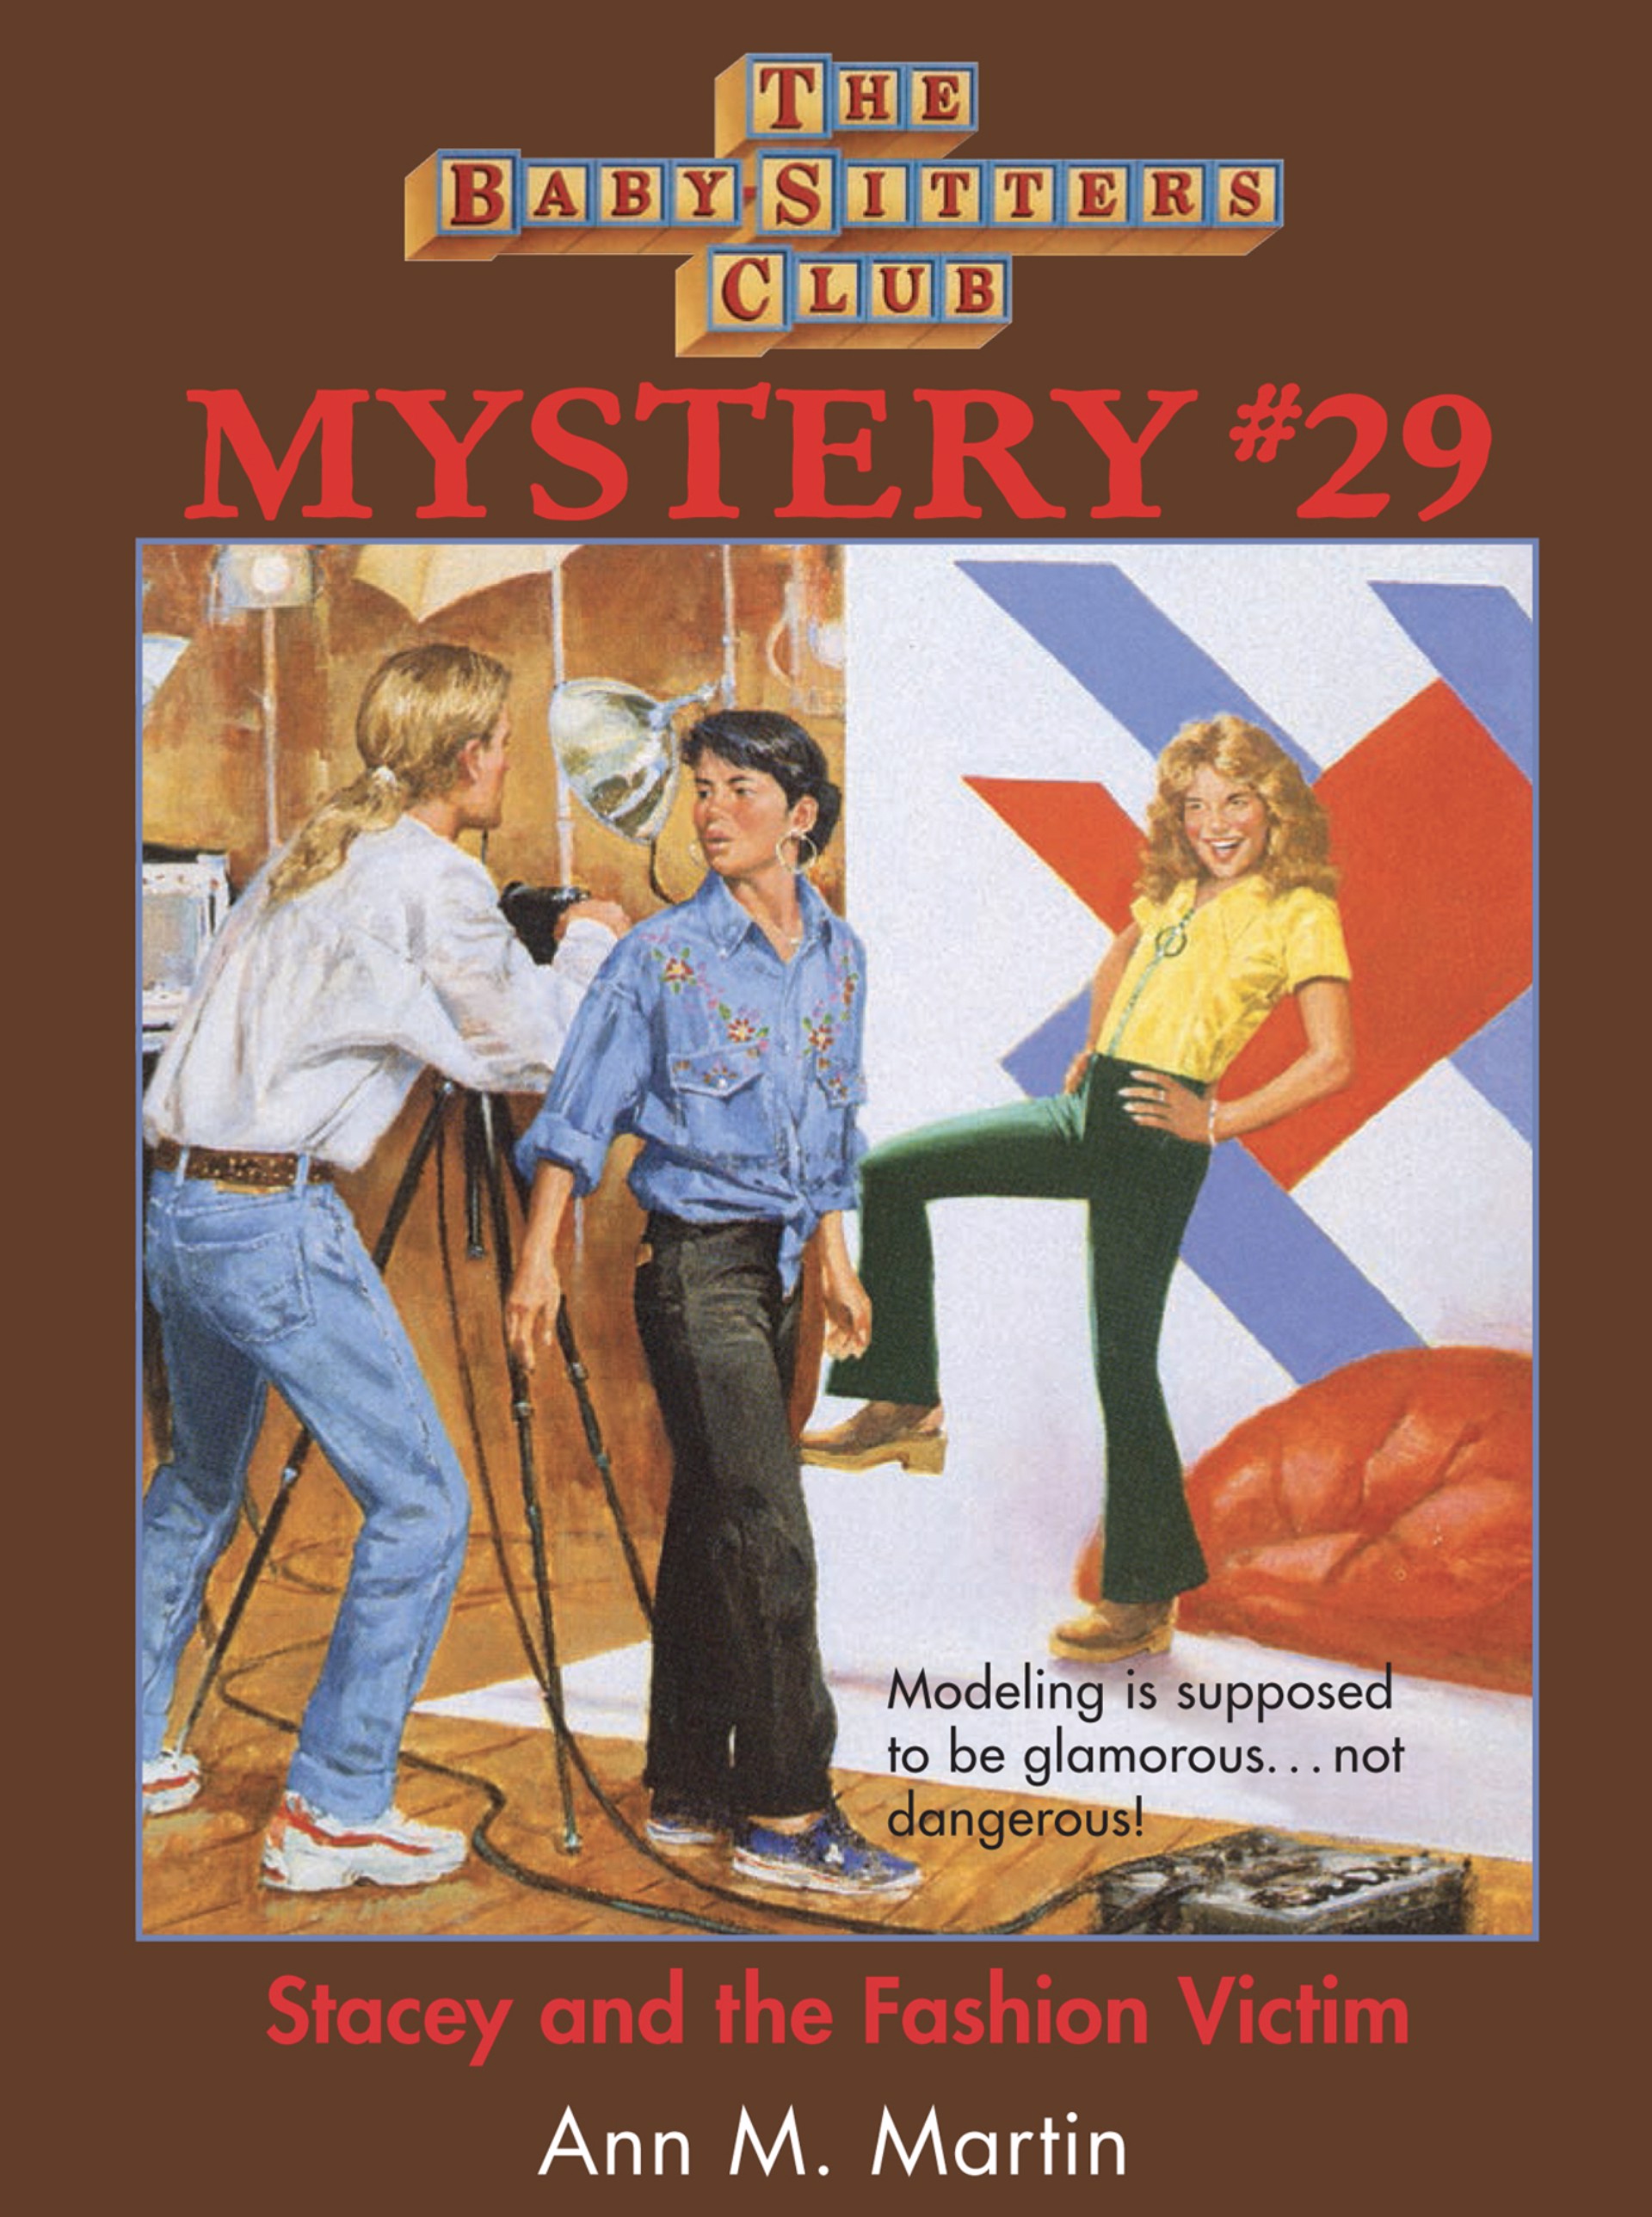 The Babysitter’s Club Mystery #29 “Stacey and the Fashion Victim” by Hodges Soileau